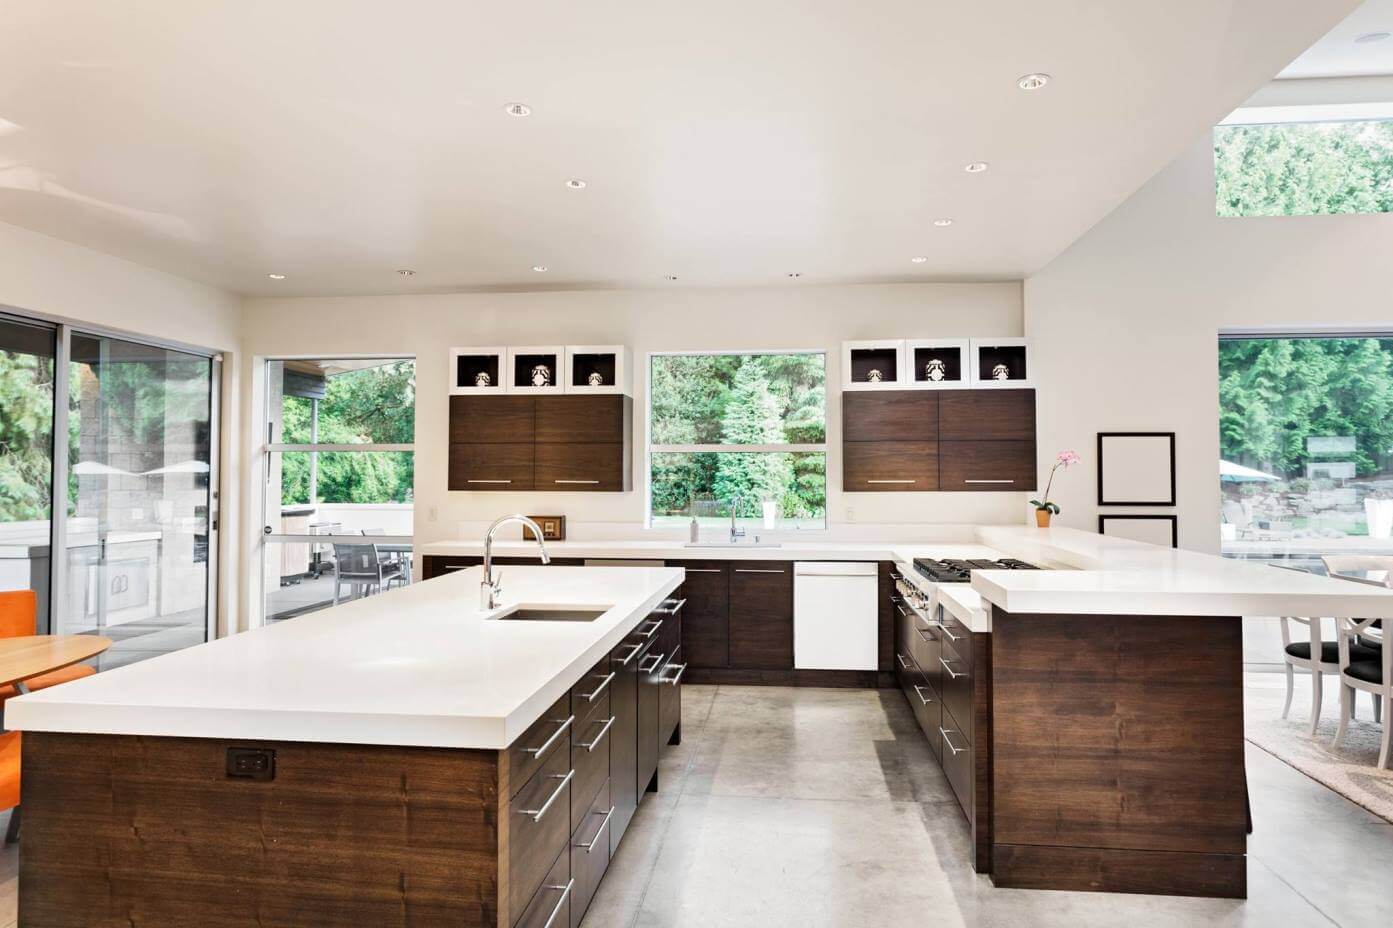 Simple Remodeling Tips To Make Your Kitchen Look Bigger